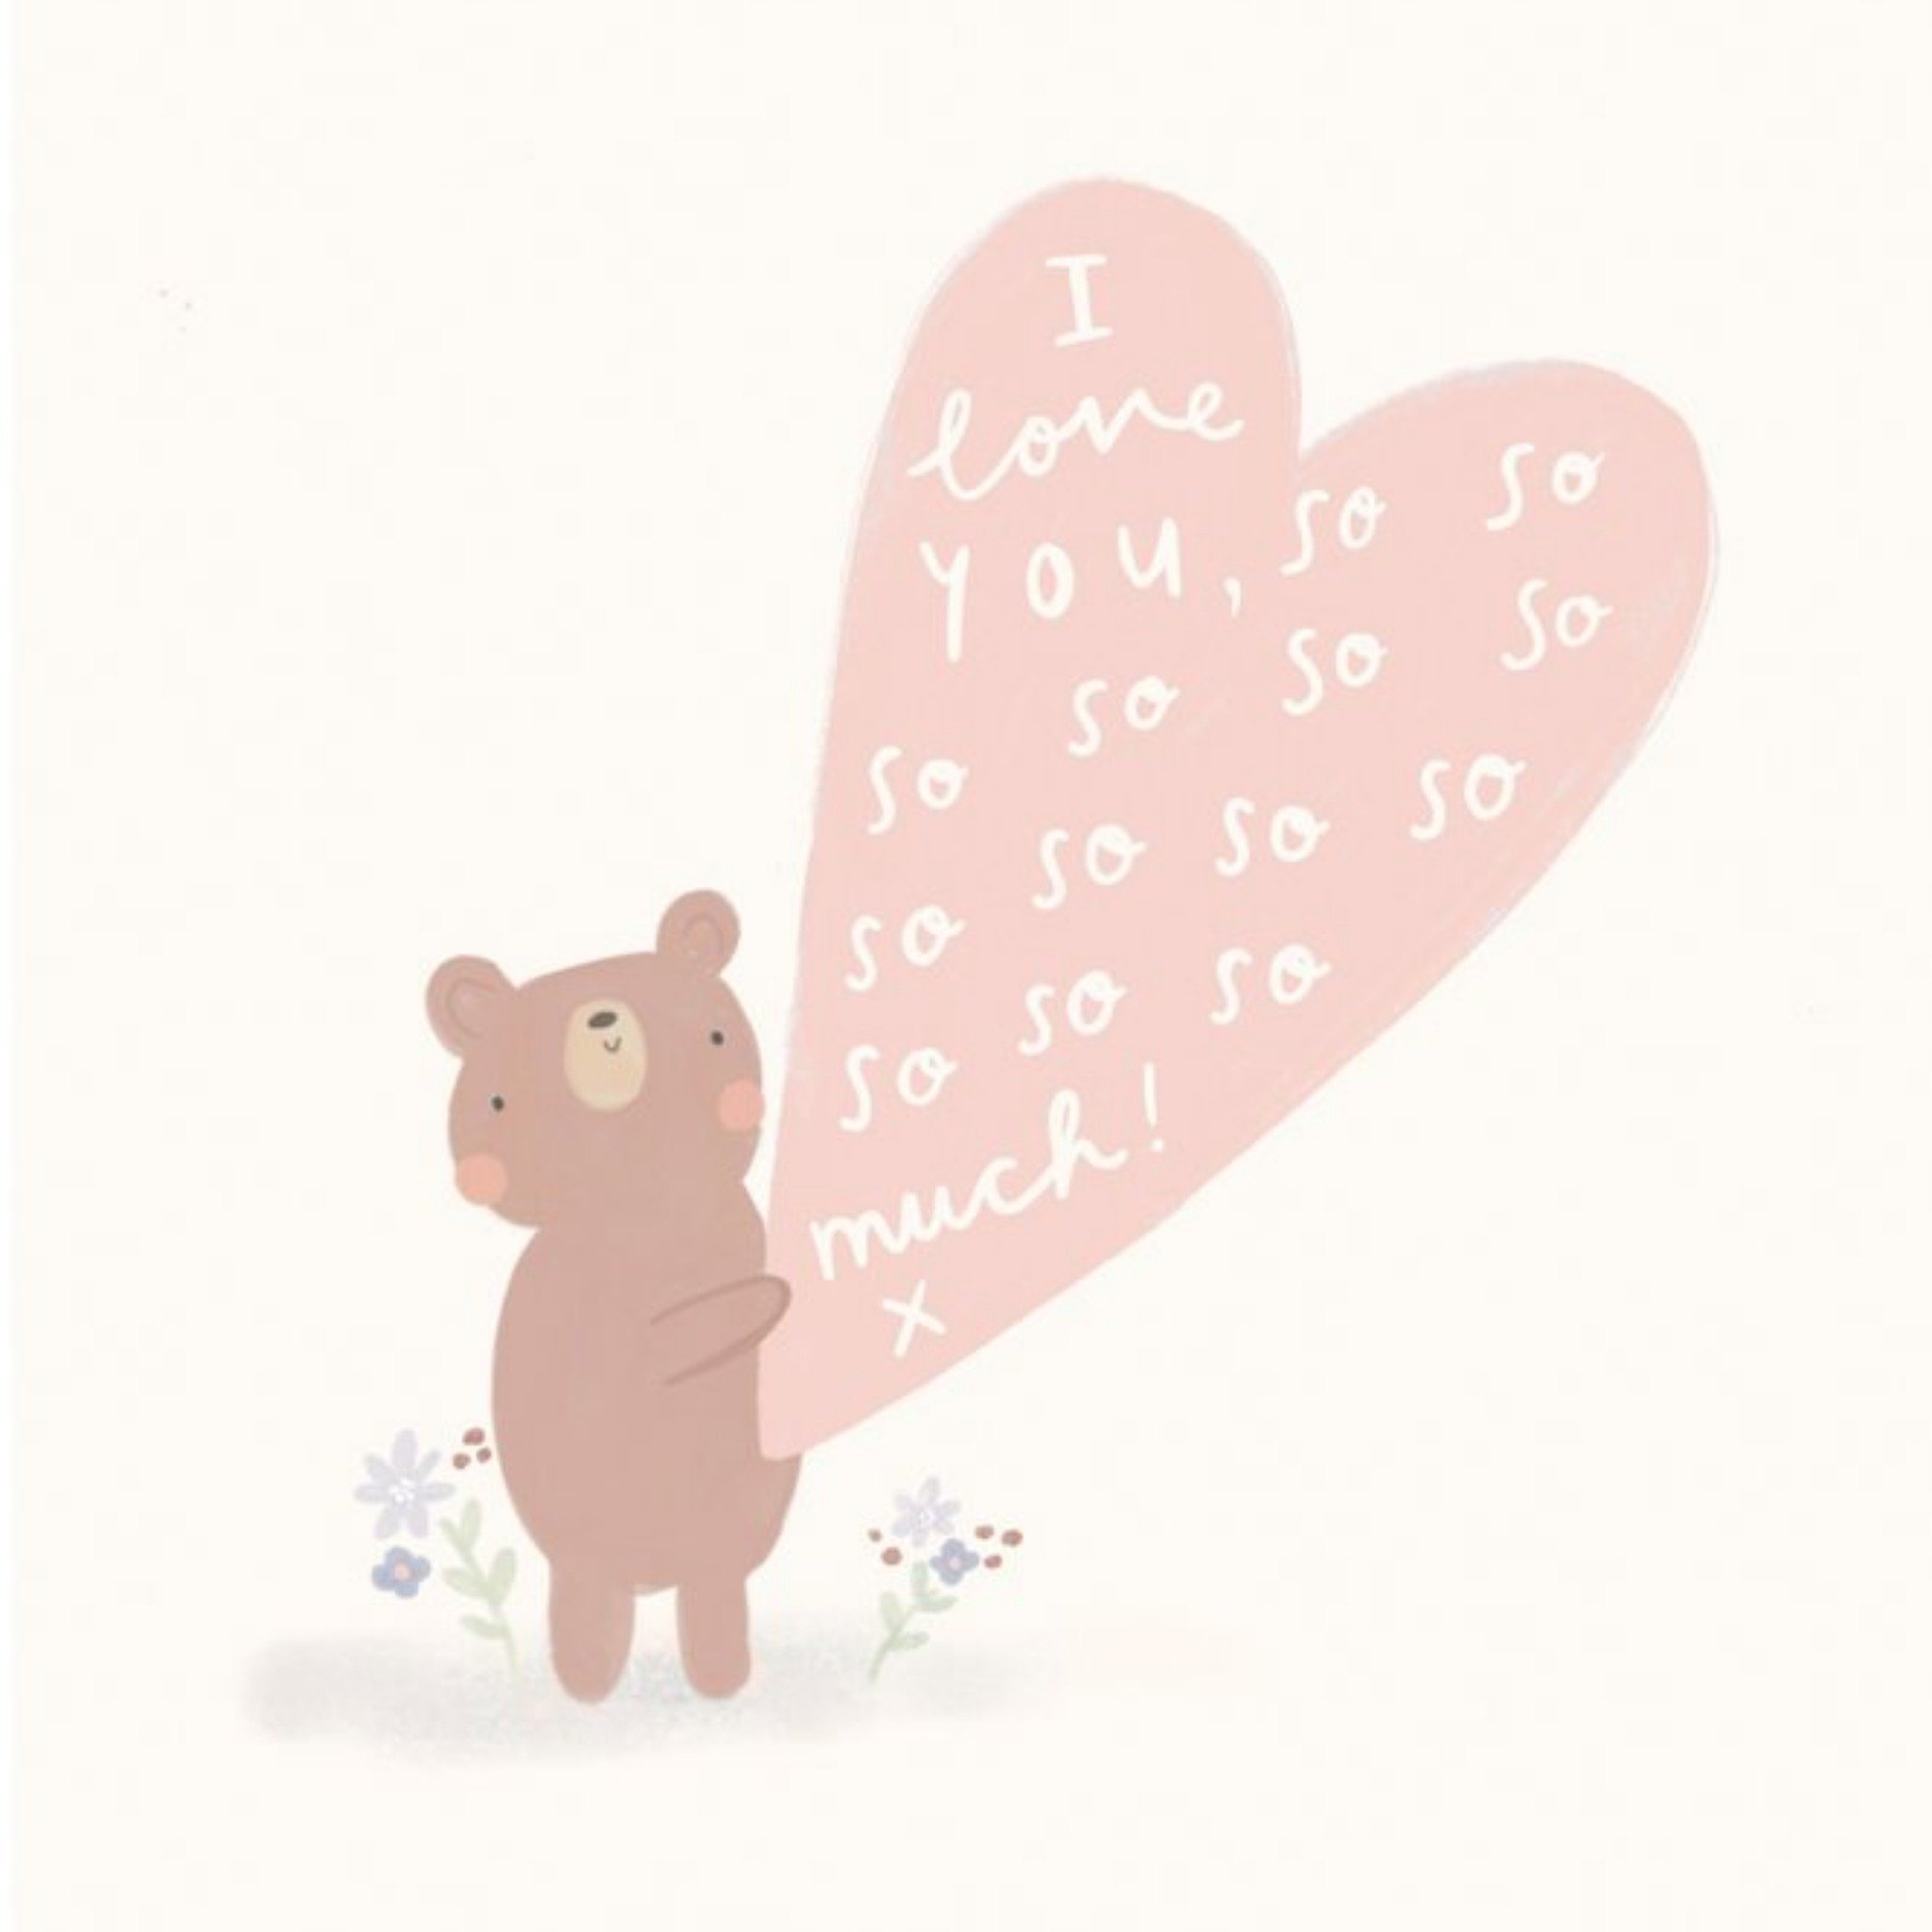 Moonpig Illustration Of A Bear Holding A Heart With A Message Thinking Of You Card, Square